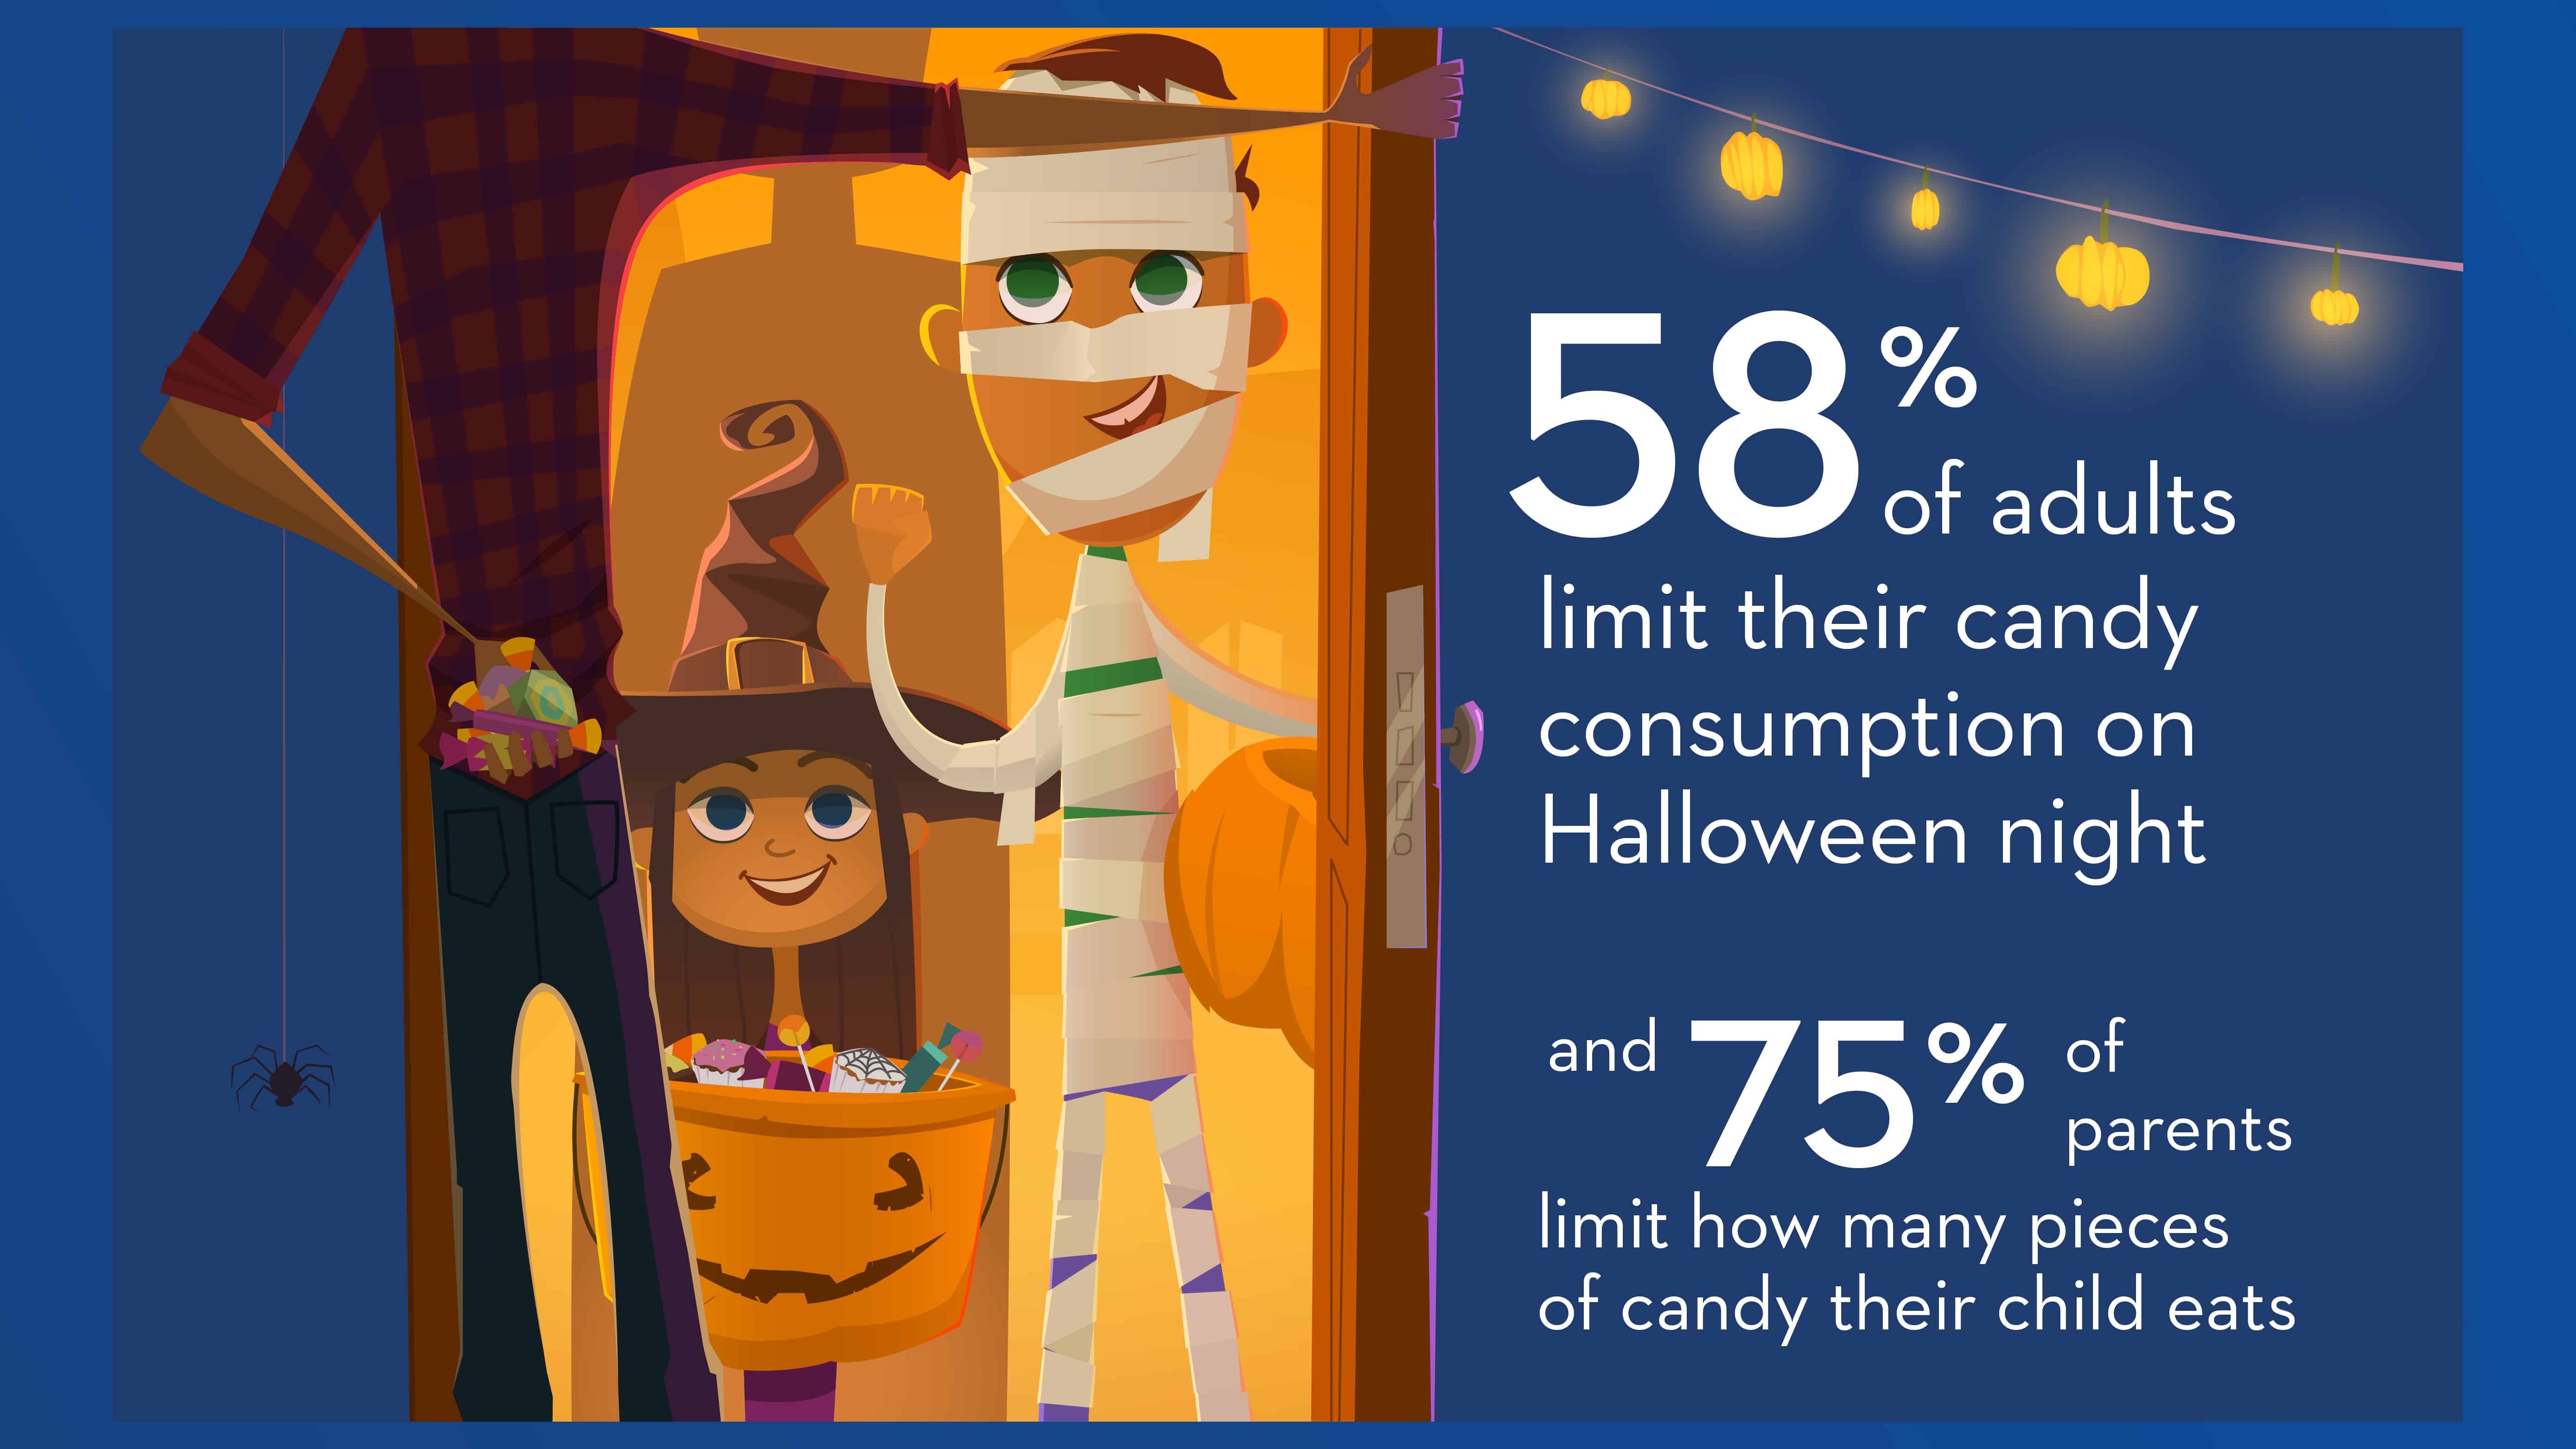 Tips for Keeping Kids Safe and Healthy This Halloween